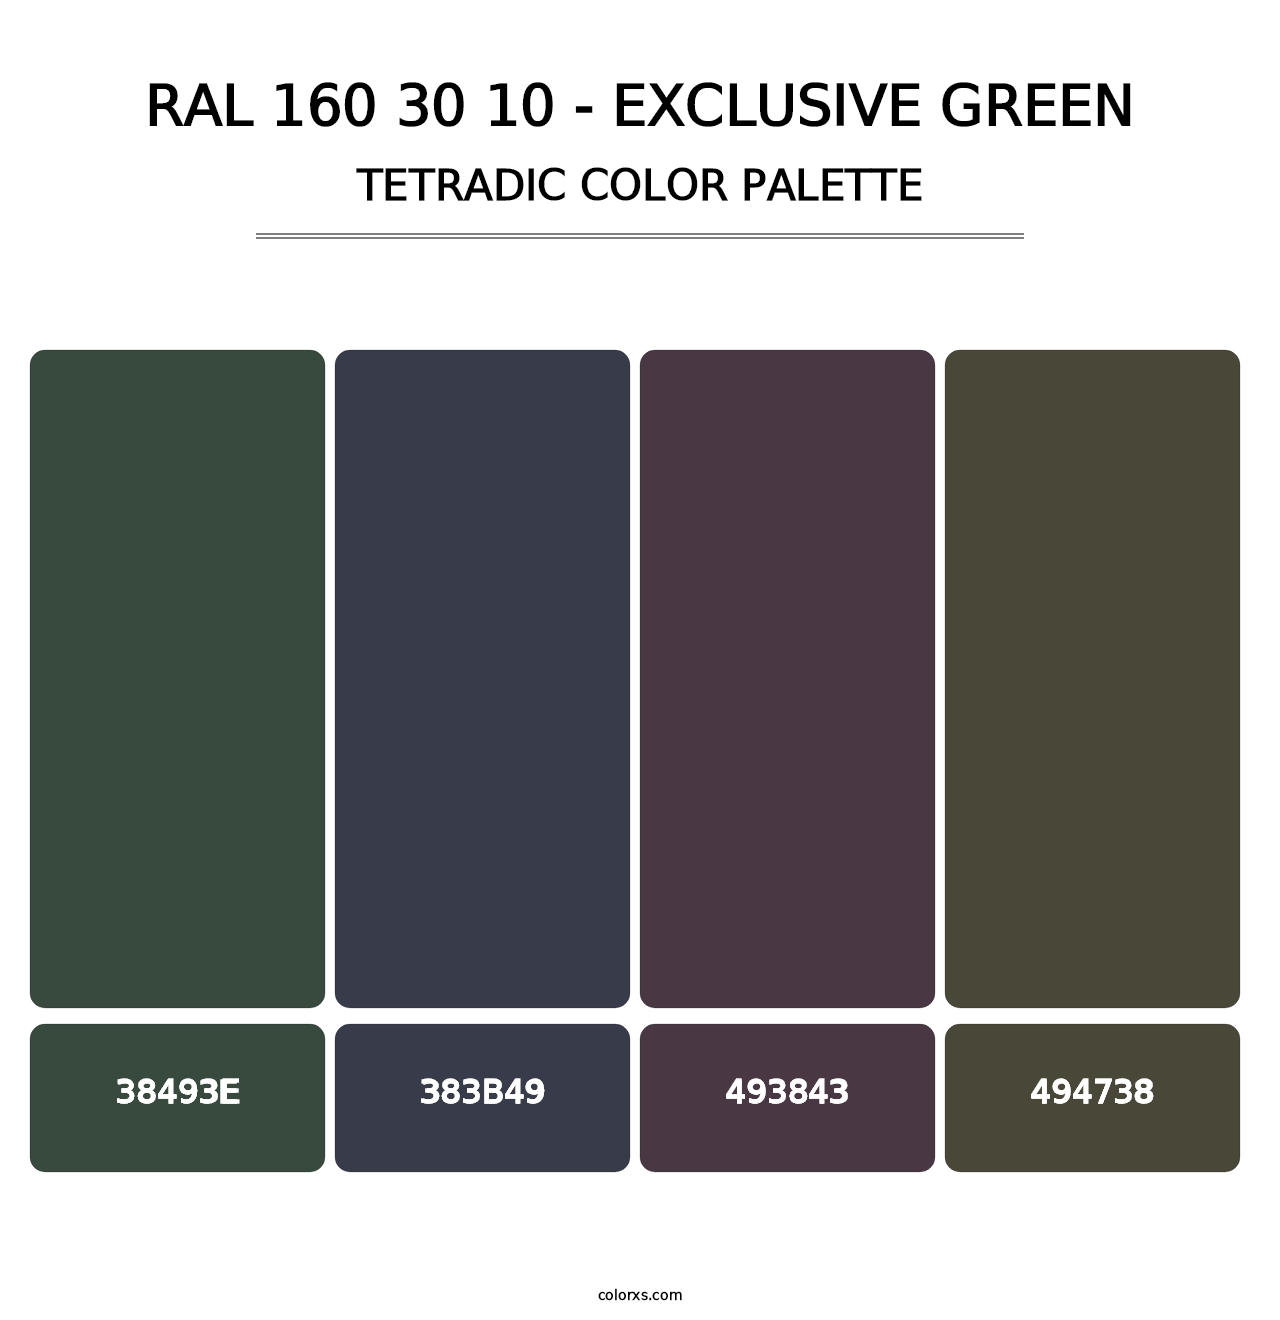 RAL 160 30 10 - Exclusive Green - Tetradic Color Palette